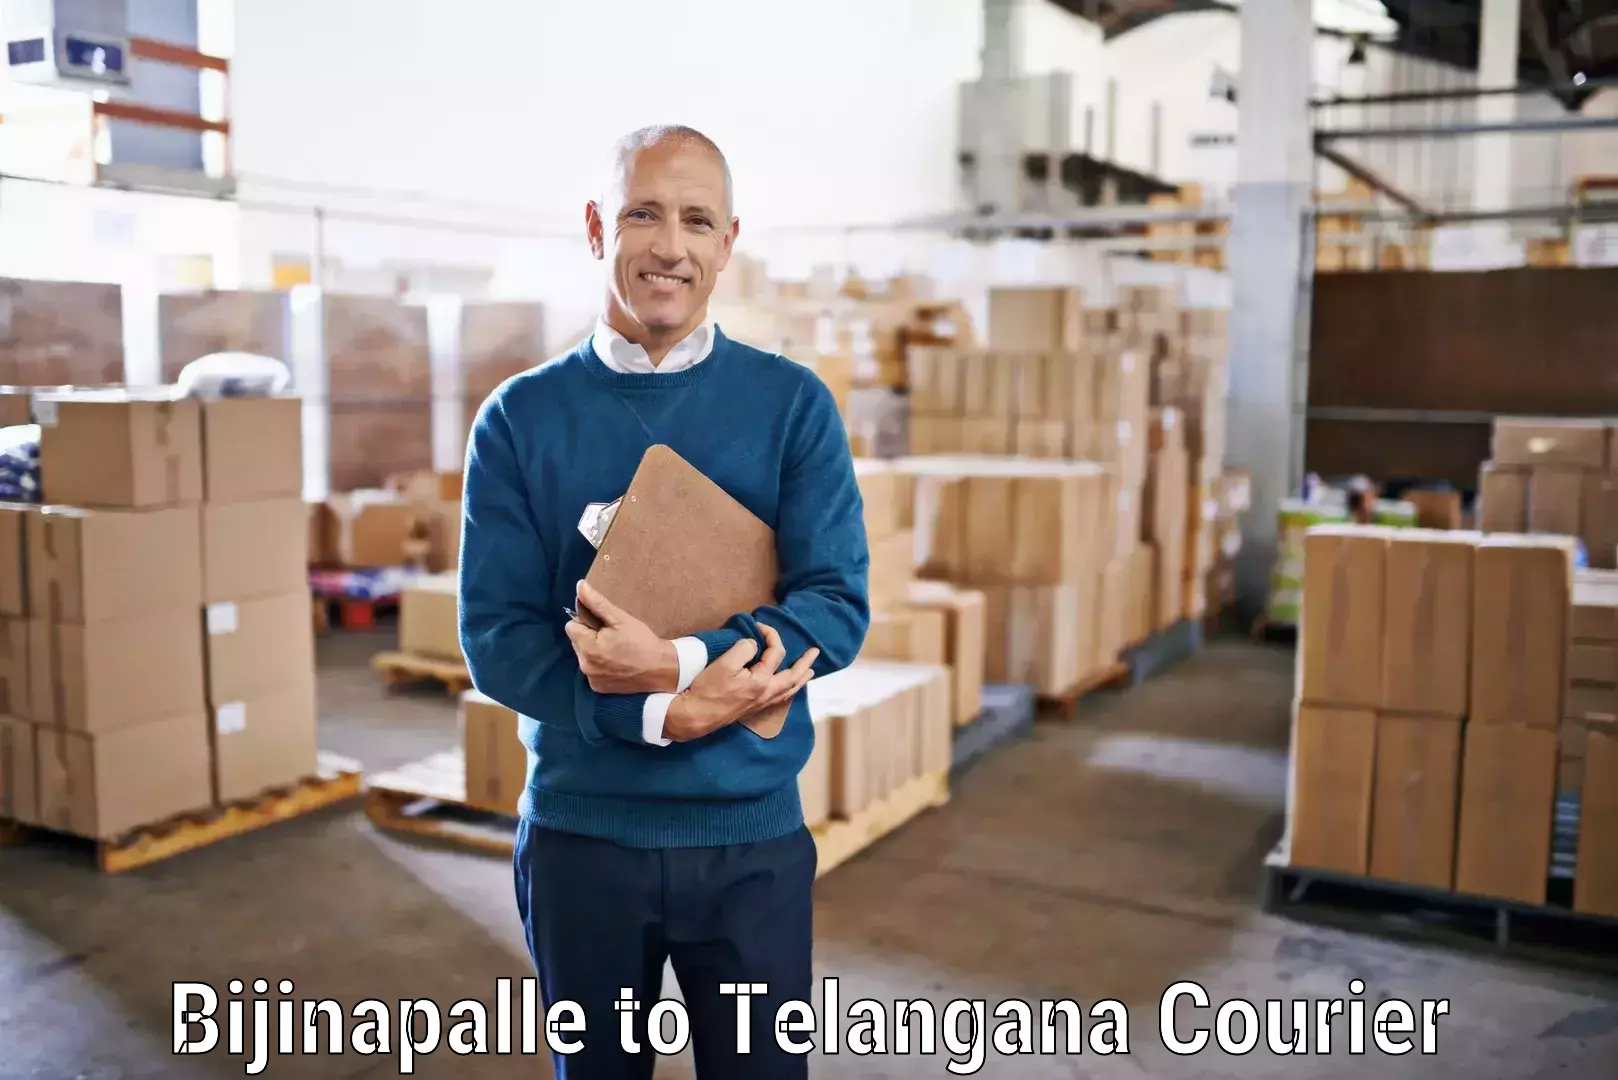 State-of-the-art courier technology Bijinapalle to Madhira